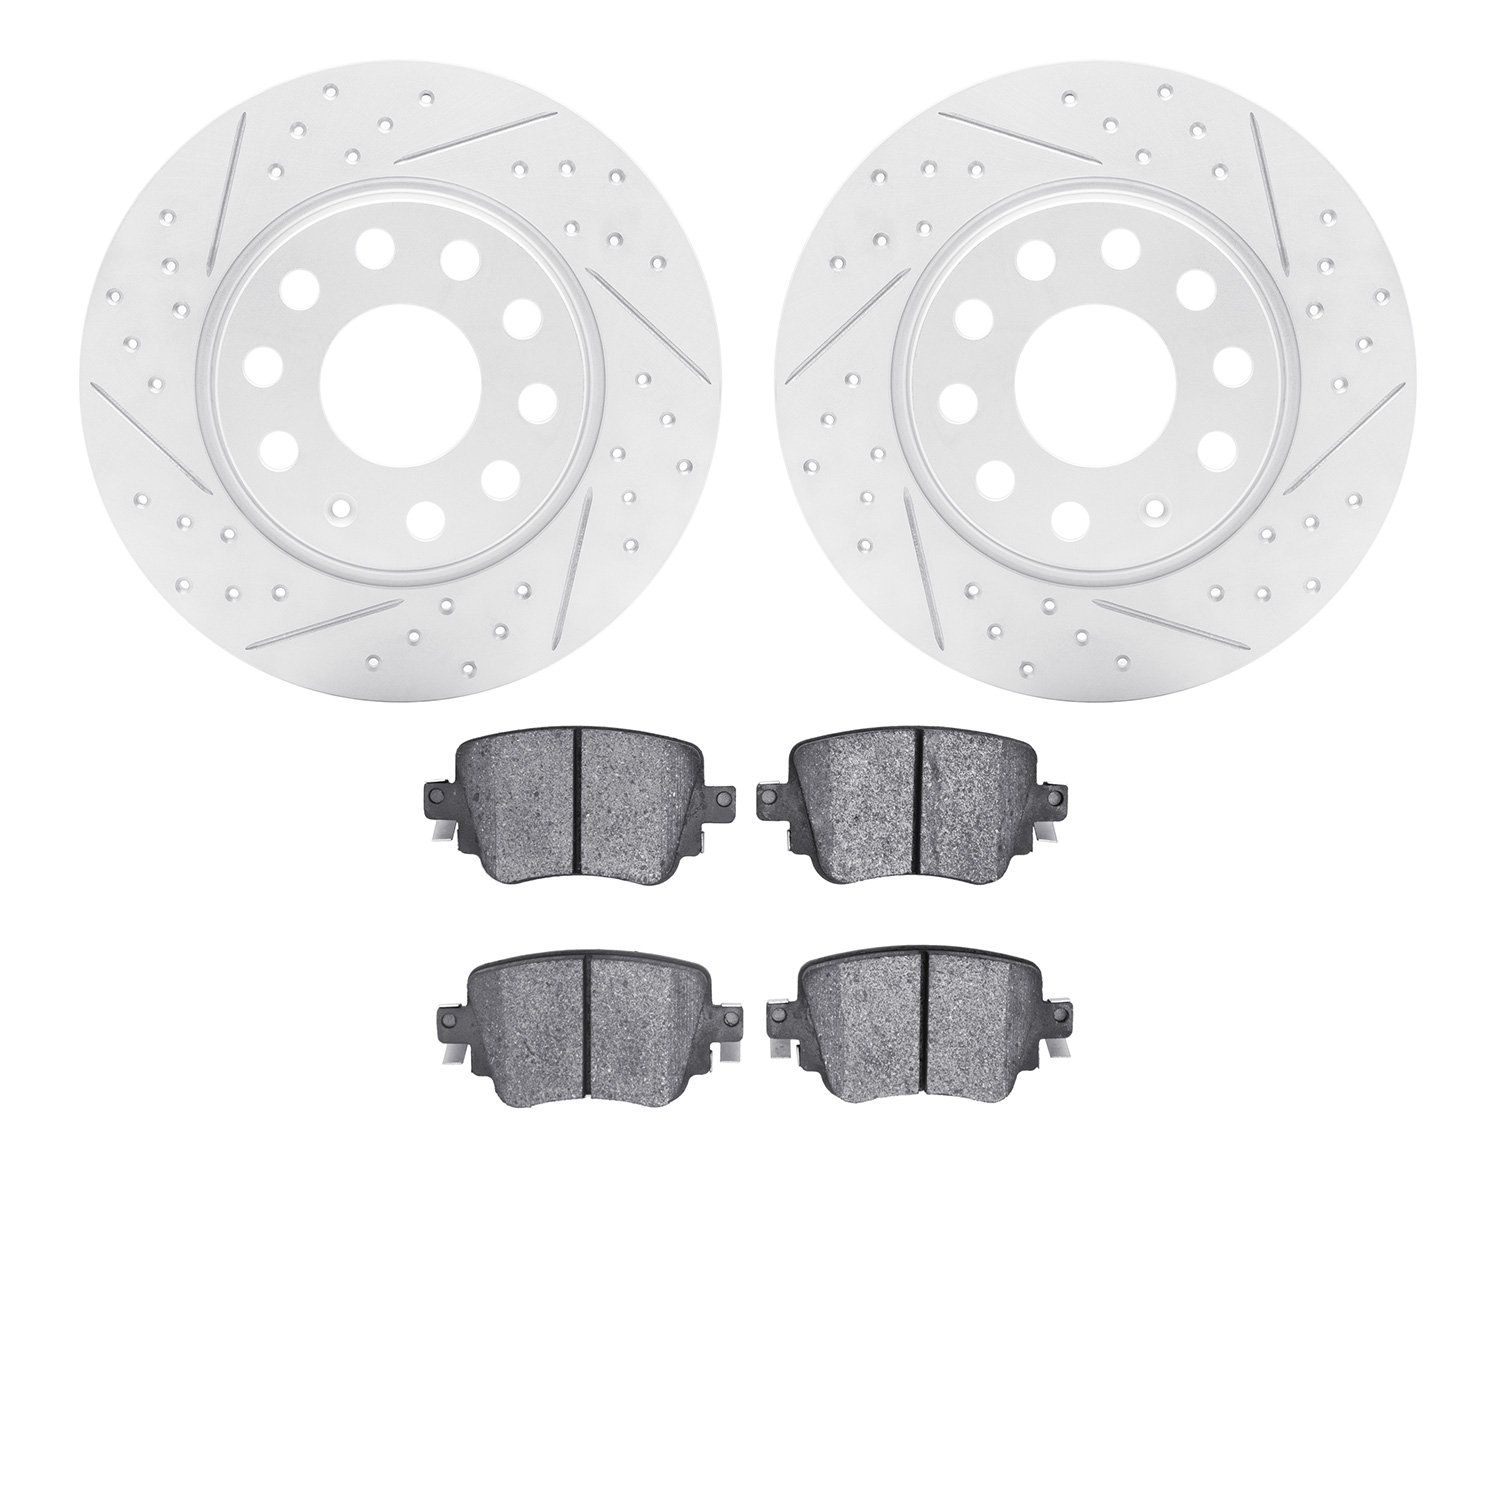 2702-74063 Geoperformance Drilled/Slotted Brake Rotors with Active Performance Pads Kit, Fits Select Audi/Volkswagen, Position: